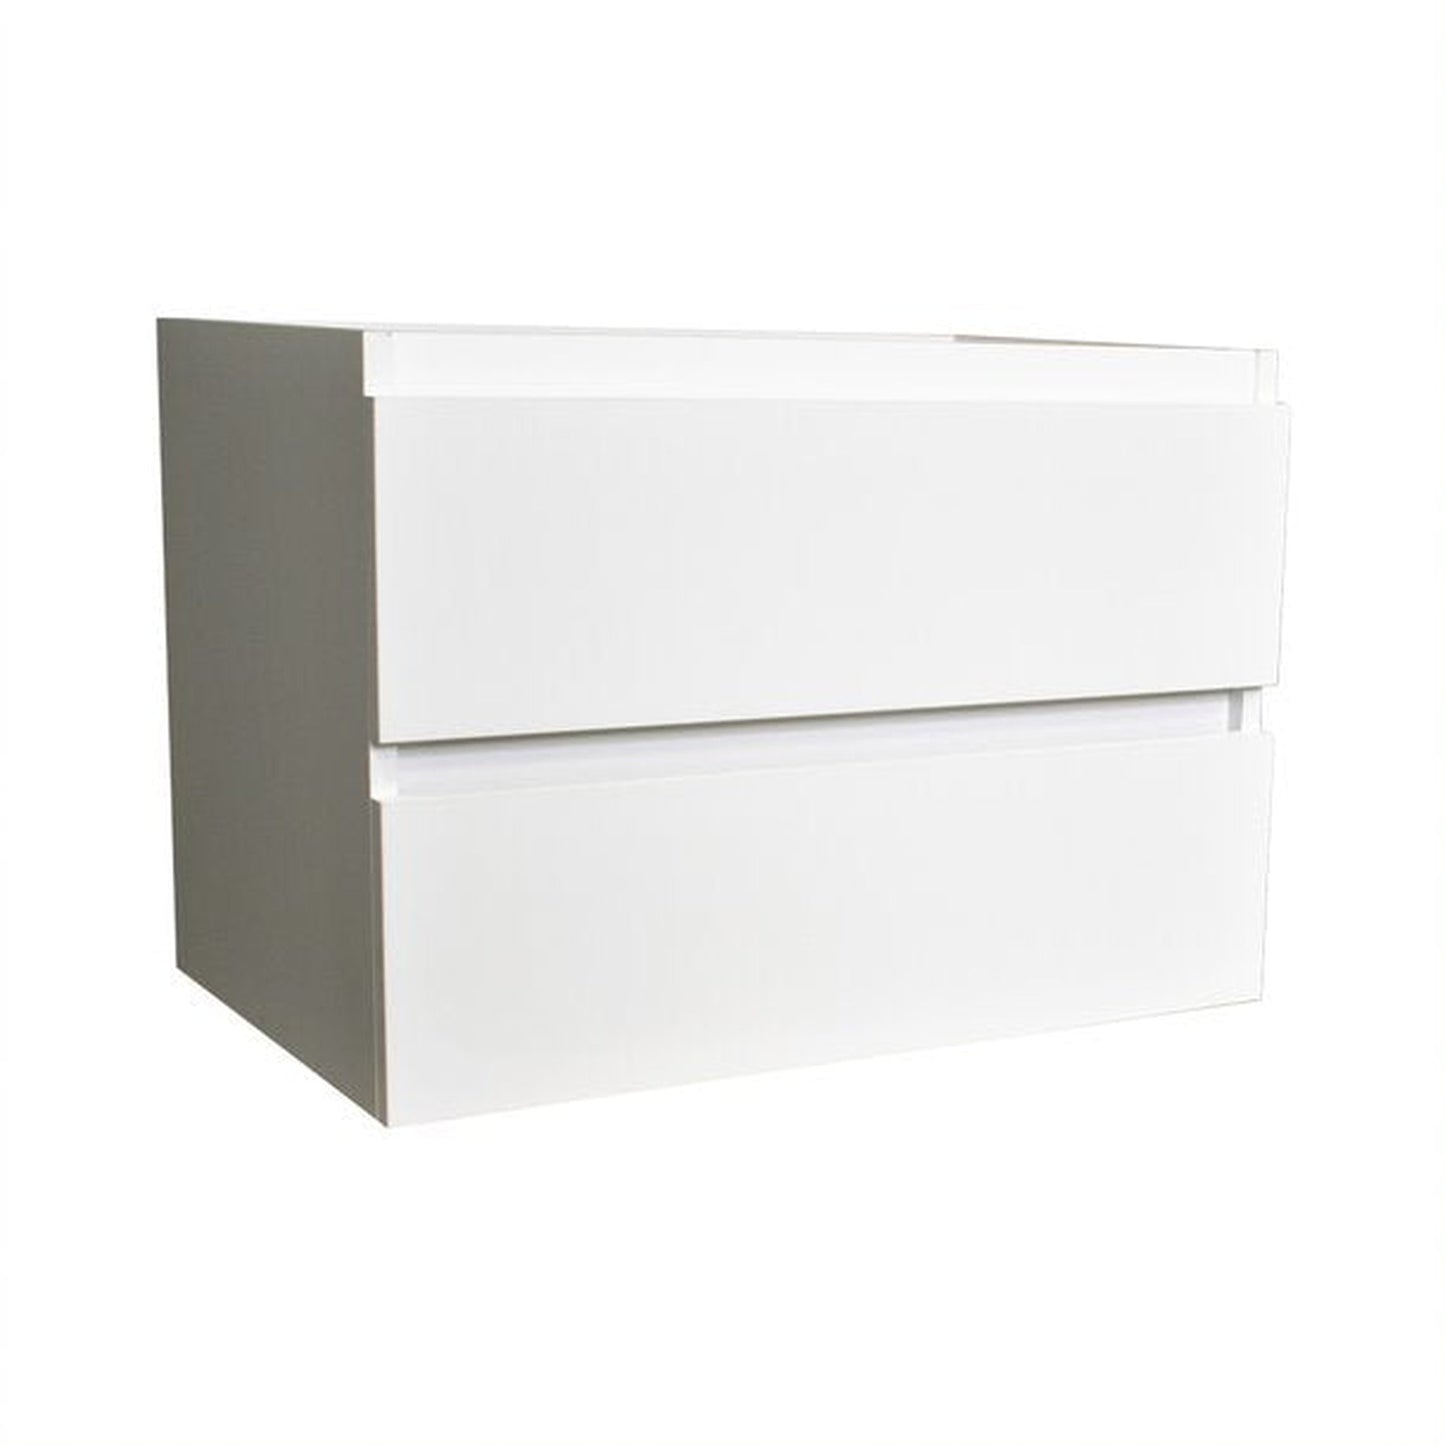 Volpa USA Salt 24" x 18" White Wall-Mounted Floating Bathroom Vanity With Drawers